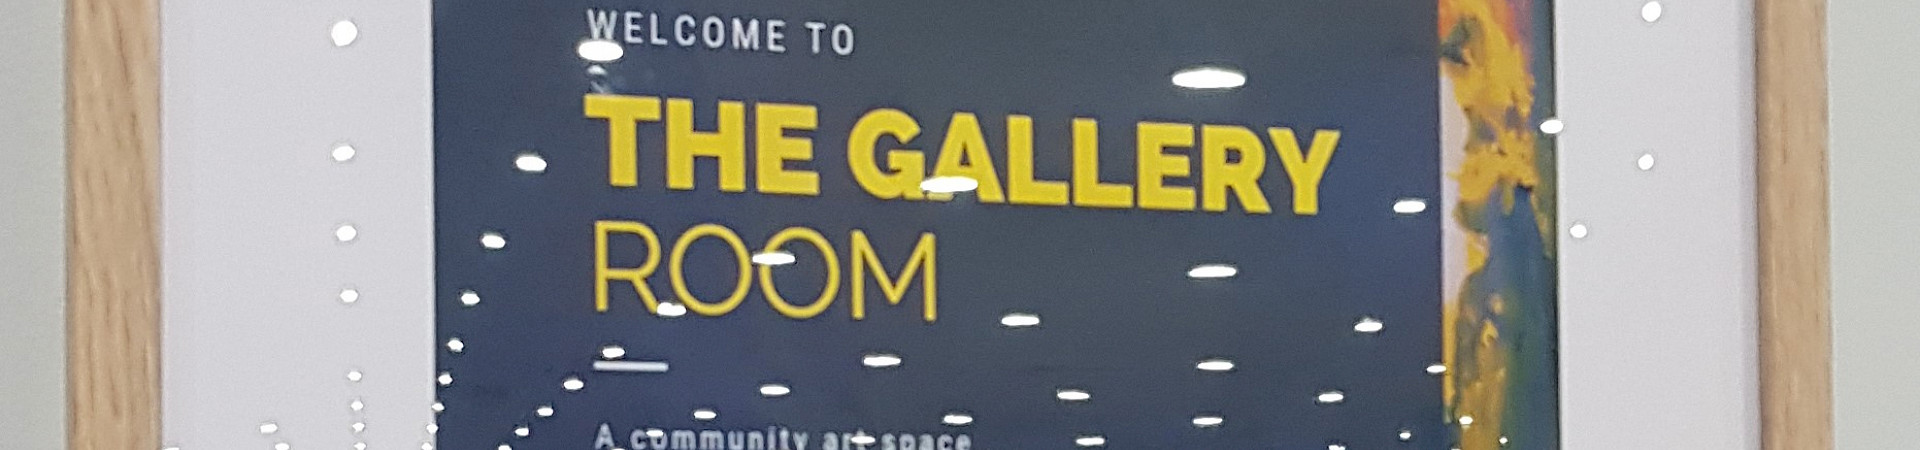 The Gallery Room - A Community Space image